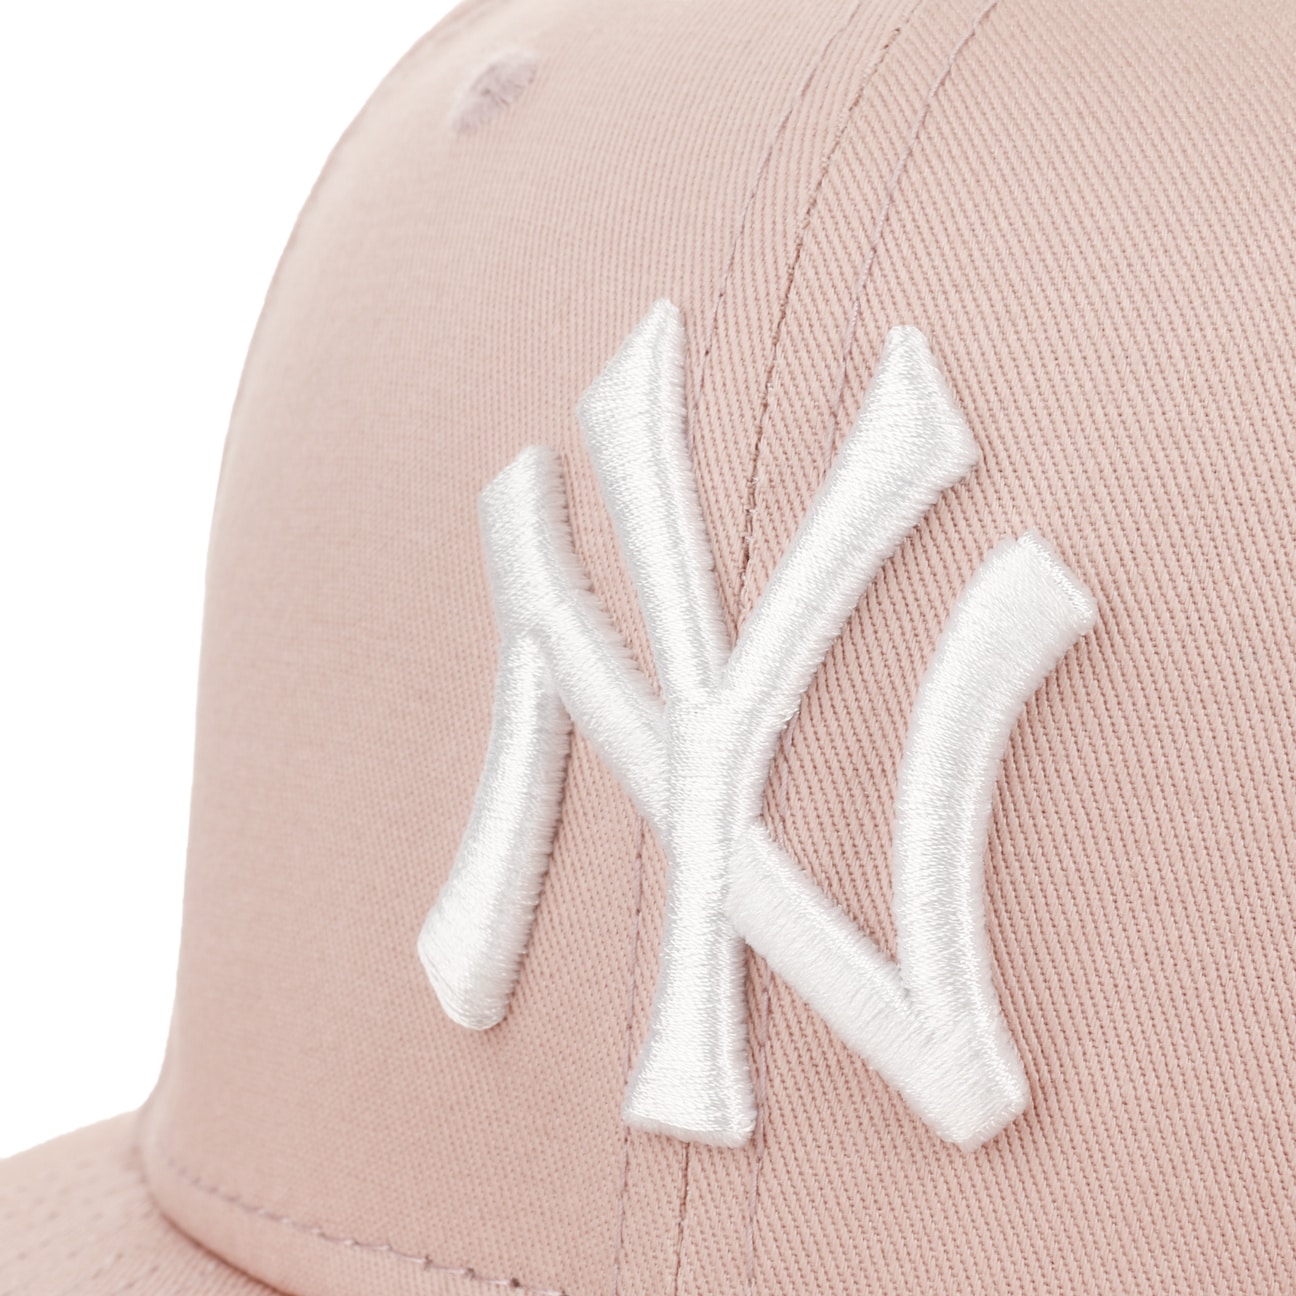 - 40,95 Era € New Essential 9Fifty Yankees League Cap by